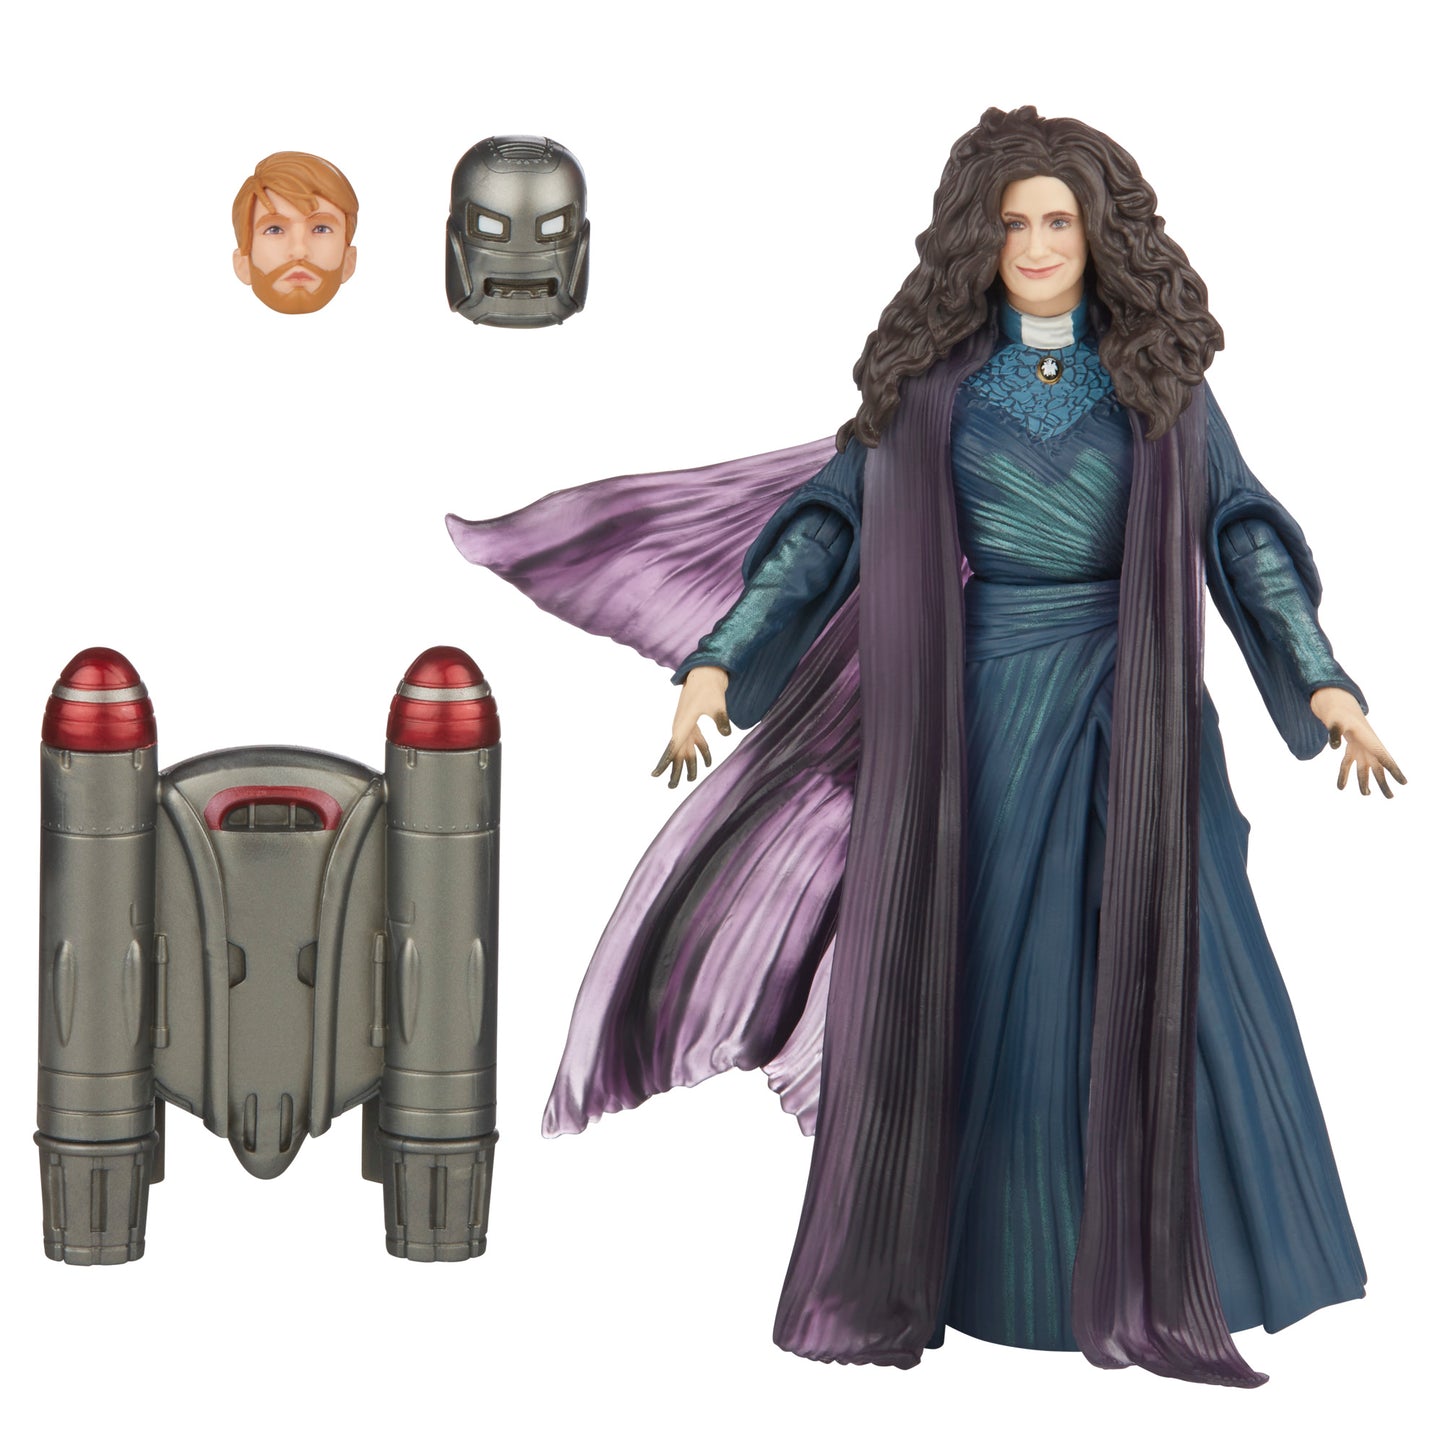 Marvel Legends Series Agatha Harkness Action Figure 6-Inch Toy with accessories - Heretoserveyou